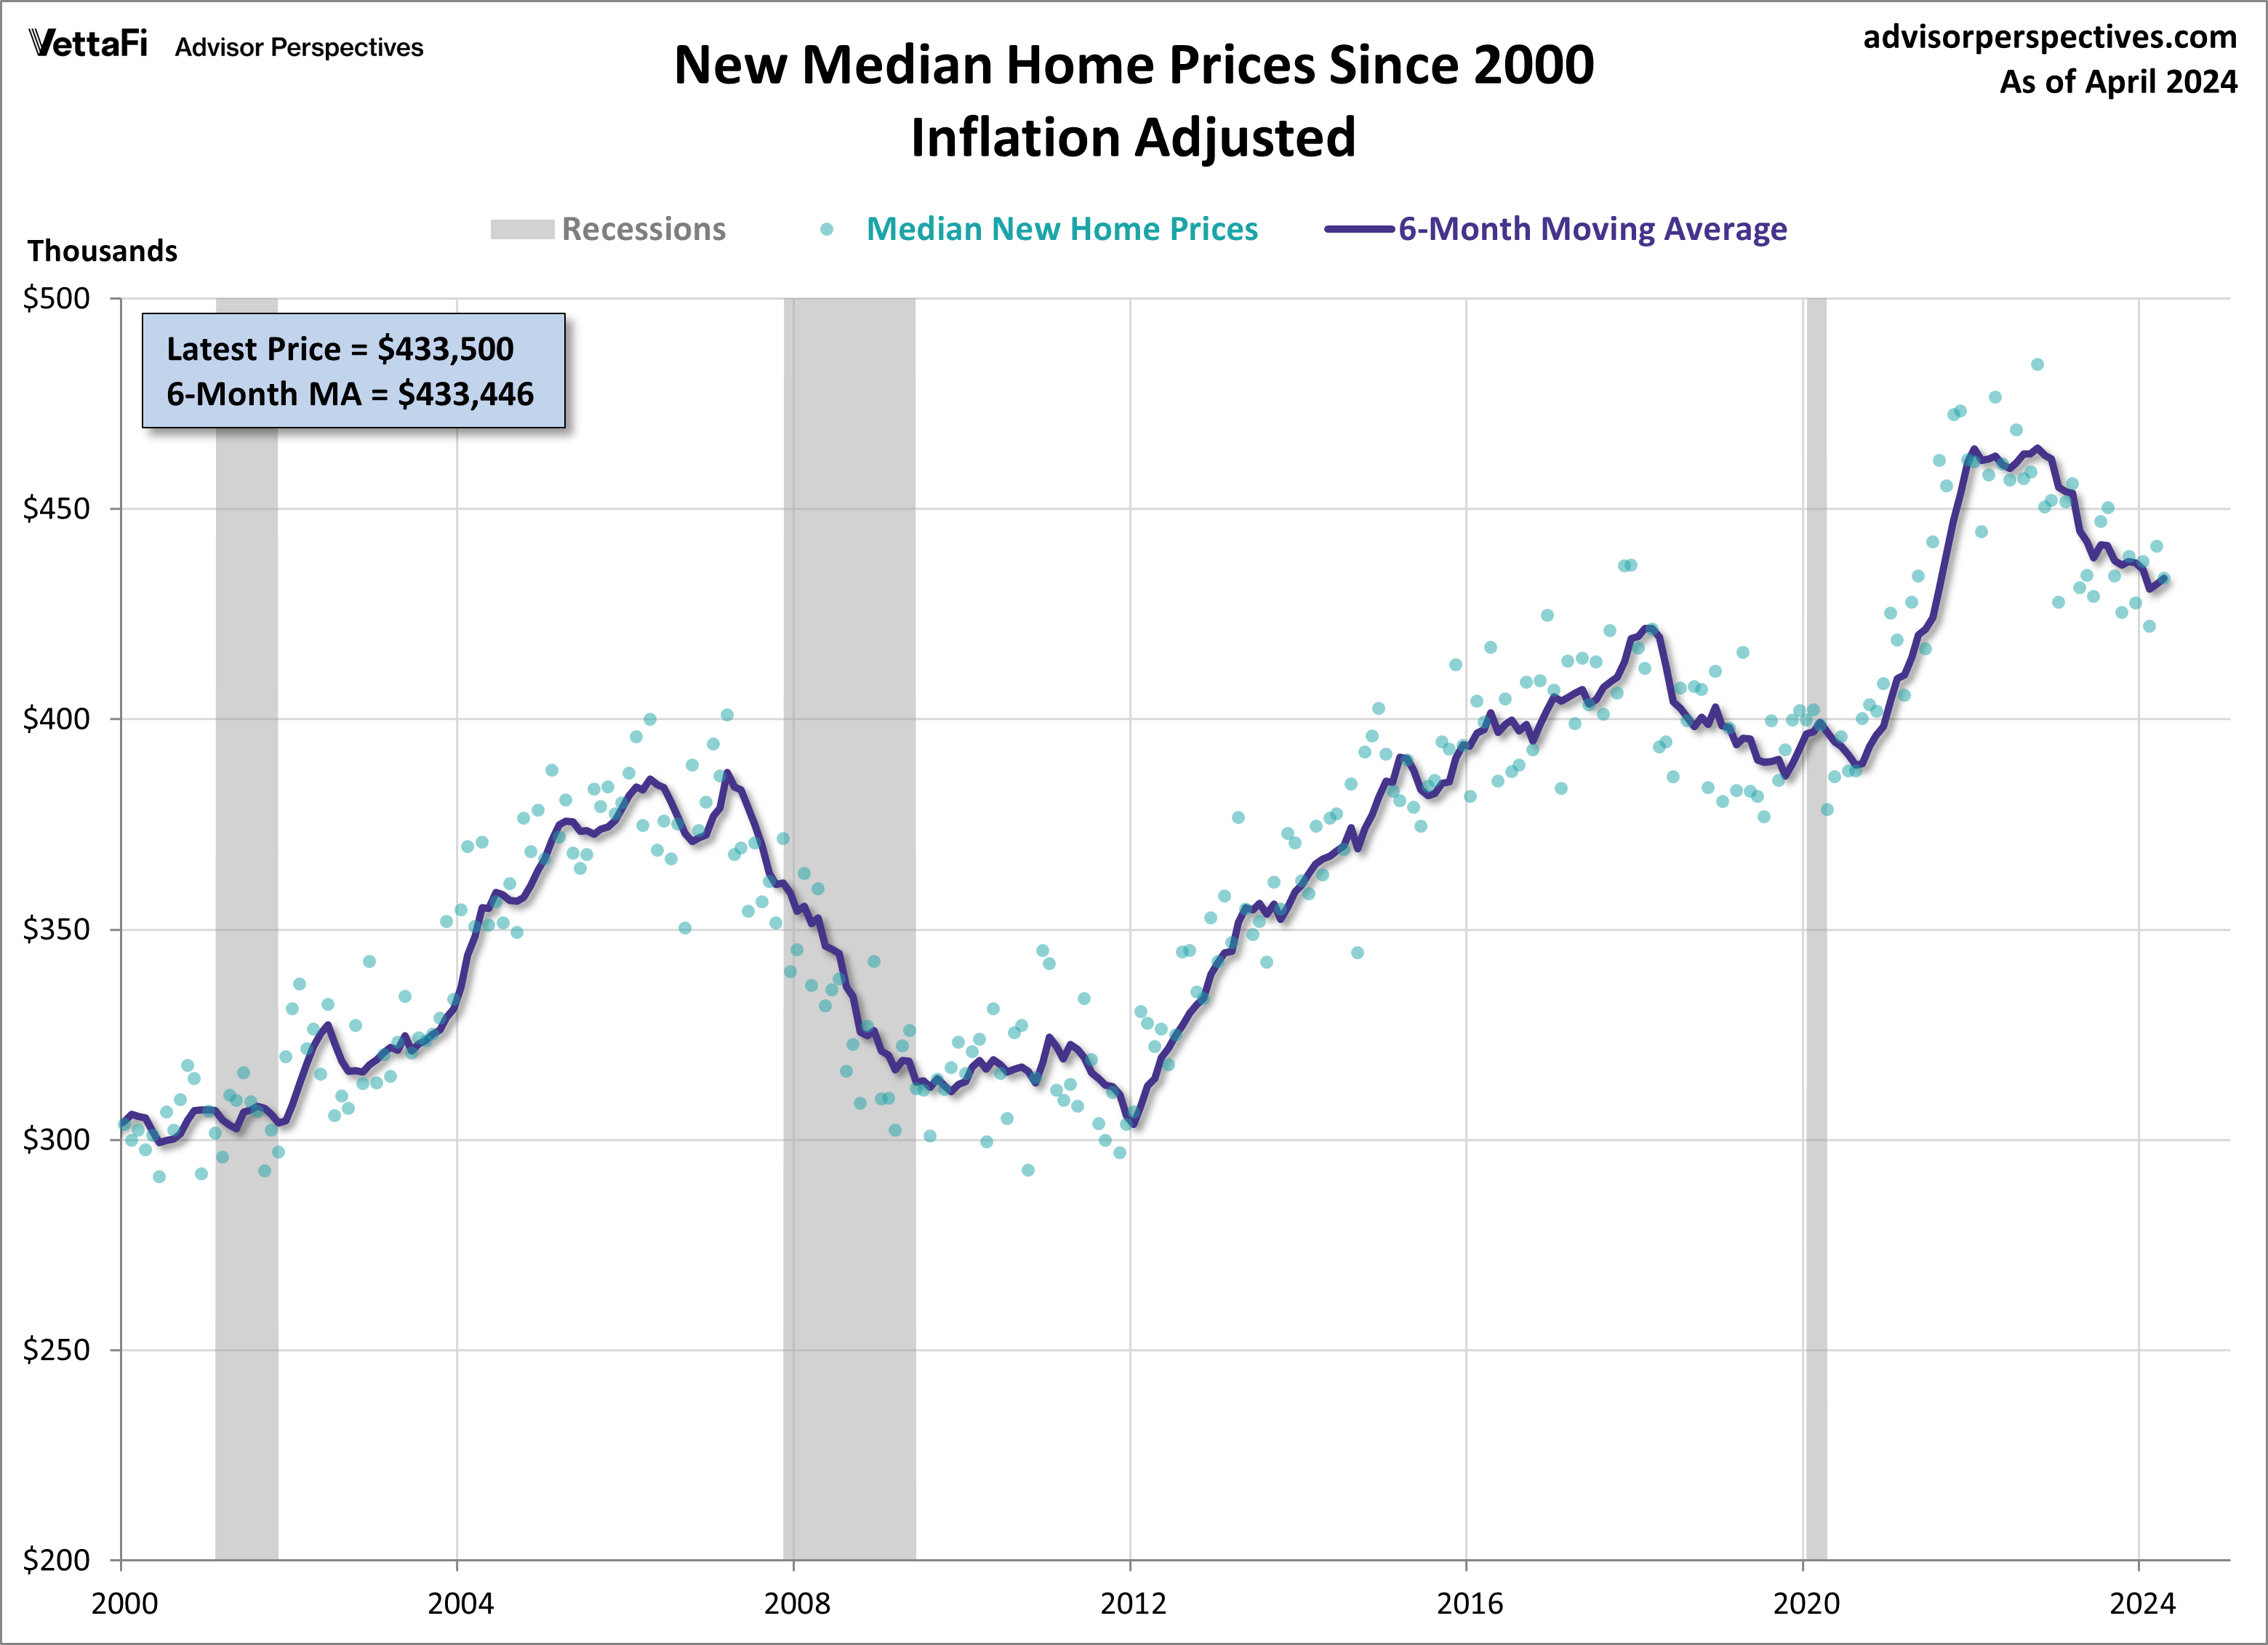 New Median Home Prices Since 2000 - Inflation Adjusted